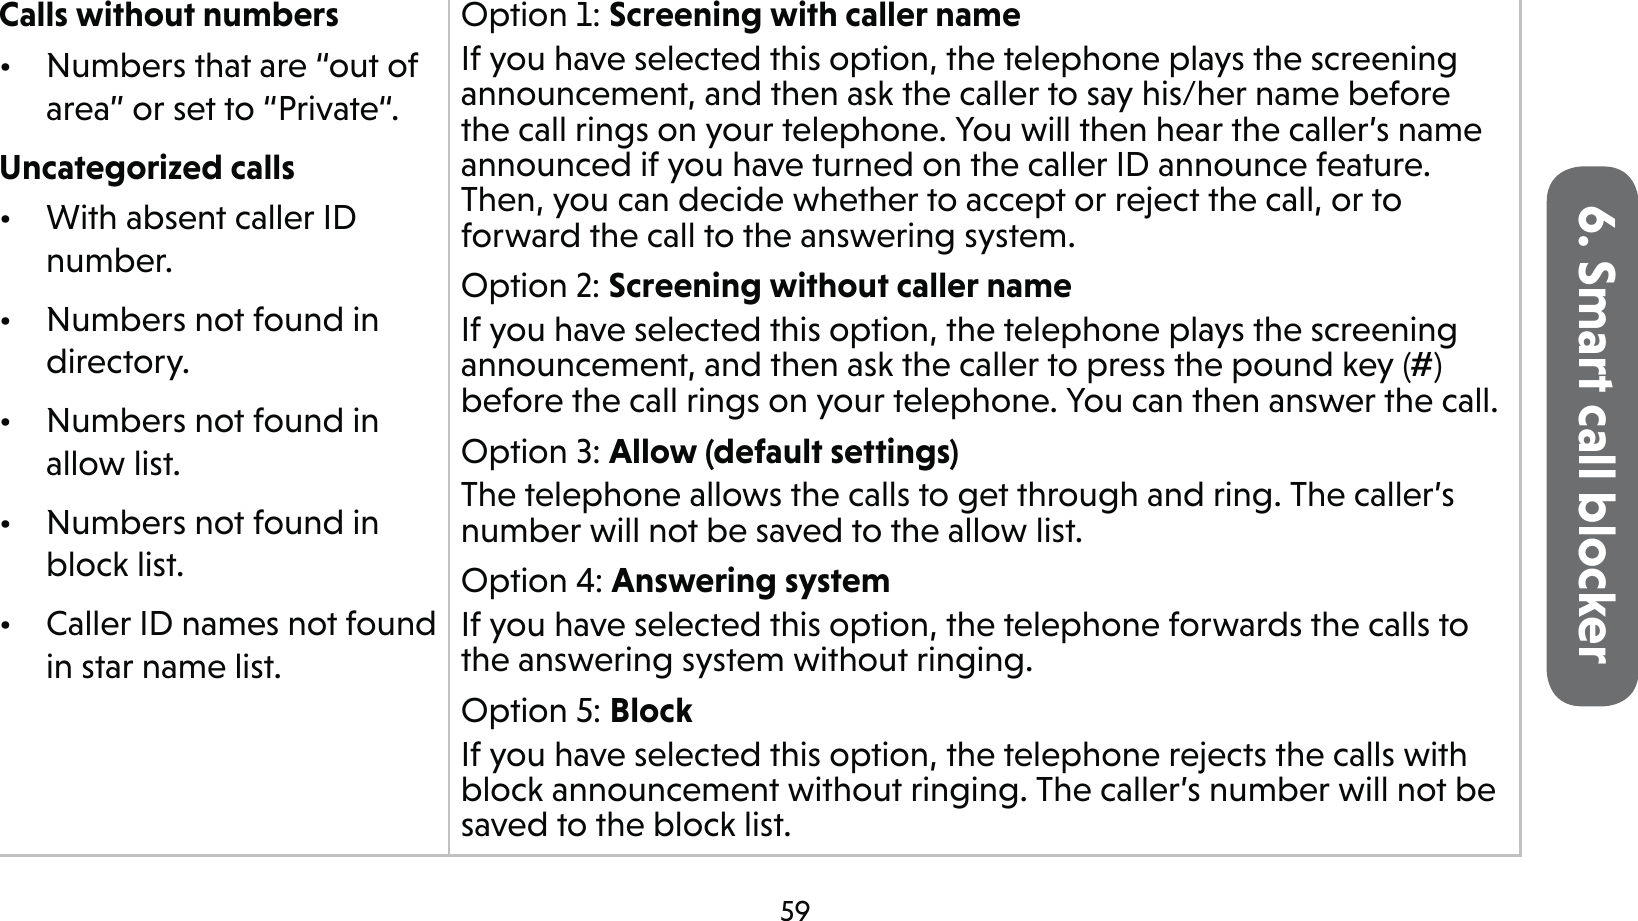 596. Smart call blockerCall category Call controlCalls without numbers•  Numbers that are “out of area” or set to “Private“.Uncategorized calls•  With absent caller ID number. •  Numbers not found in directory.•  Numbers not found in allow list.•  Numbers not found in block list.•  Caller ID names not found in star name list.Option 1: Screening with caller nameIf you have selected this option, the telephone plays the screening announcement, and then ask the caller to say his/her name before the call rings on your telephone. You will then hear the caller’s name announced if you have turned on the caller ID announce feature. Then, you can decide whether to accept or reject the call, or to forward the call to the answering system.Option 2: Screening without caller nameIf you have selected this option, the telephone plays the screening announcement, and then ask the caller to press the pound key (#) before the call rings on your telephone. You can then answer the call.Option 3: Allow (default settings)The telephone allows the calls to get through and ring. The caller’s number will not be saved to the allow list.Option 4: Answering systemIf you have selected this option, the telephone forwards the calls to the answering system without ringing.Option 5: BlockIf you have selected this option, the telephone rejects the calls with block announcement without ringing. The caller’s number will not be saved to the block list.